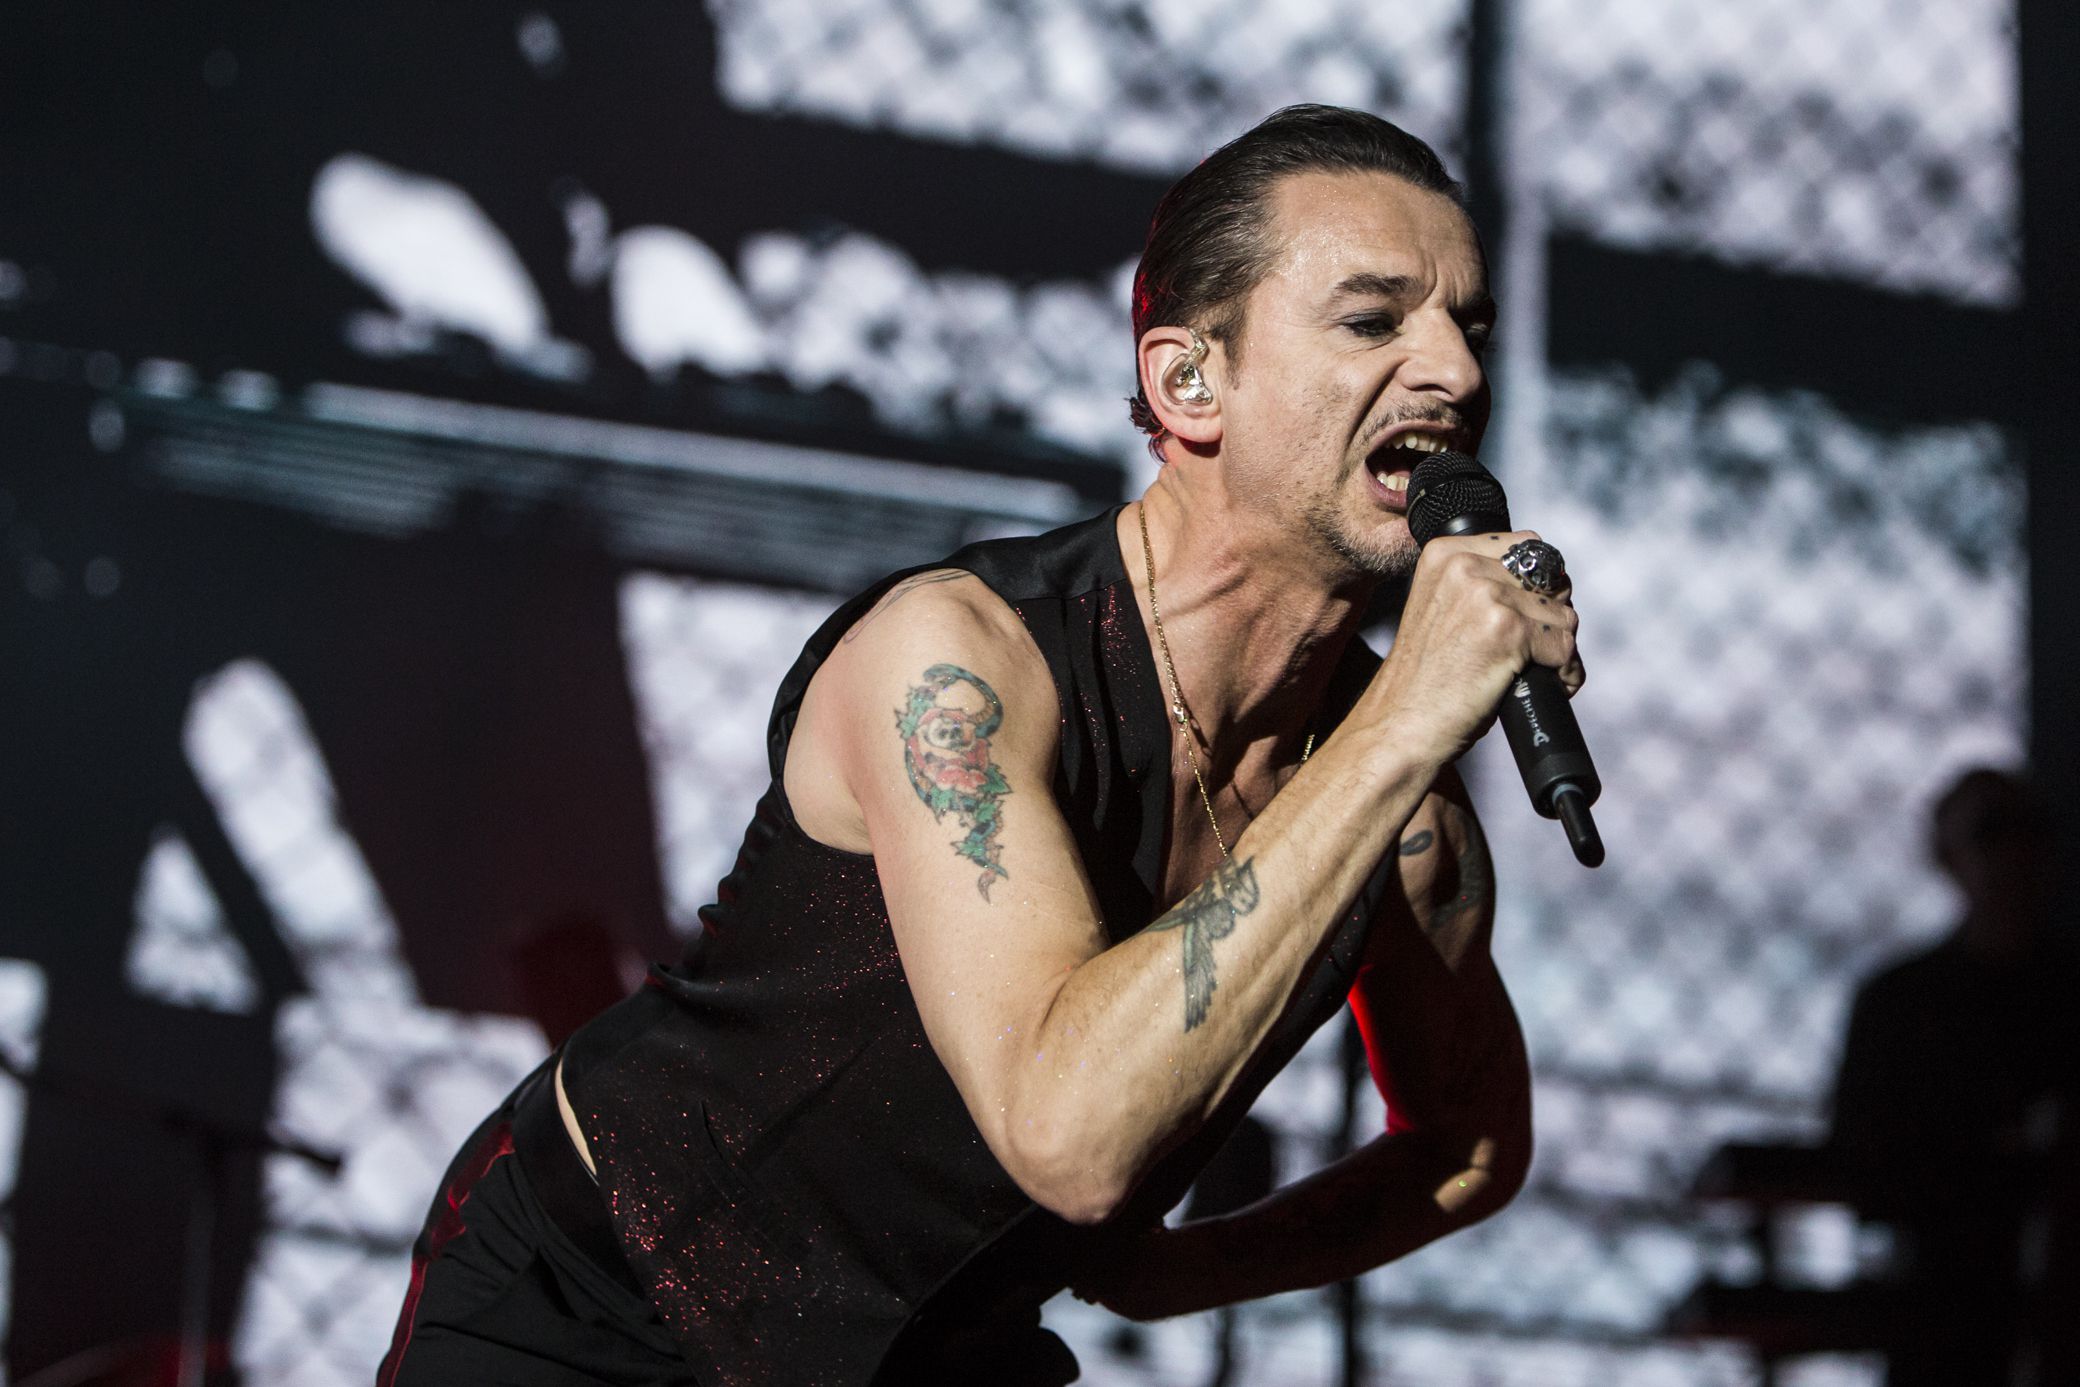 depeche mode 11 Live Review: Depeche Mode at the Hollywood Bowl (10/12)